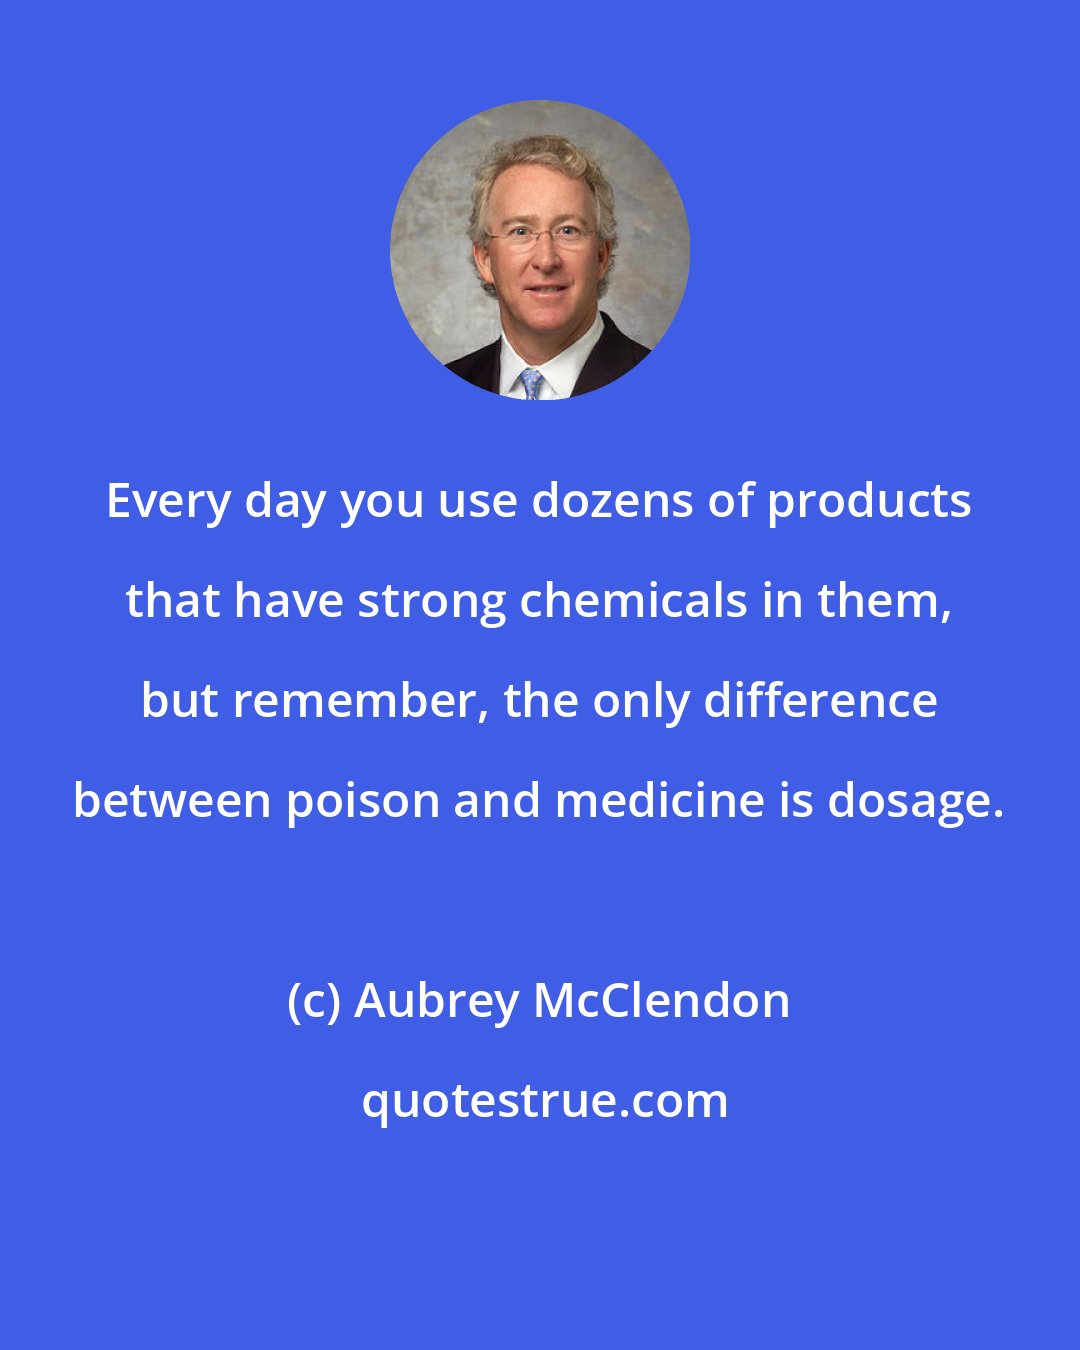 Aubrey McClendon: Every day you use dozens of products that have strong chemicals in them, but remember, the only difference between poison and medicine is dosage.